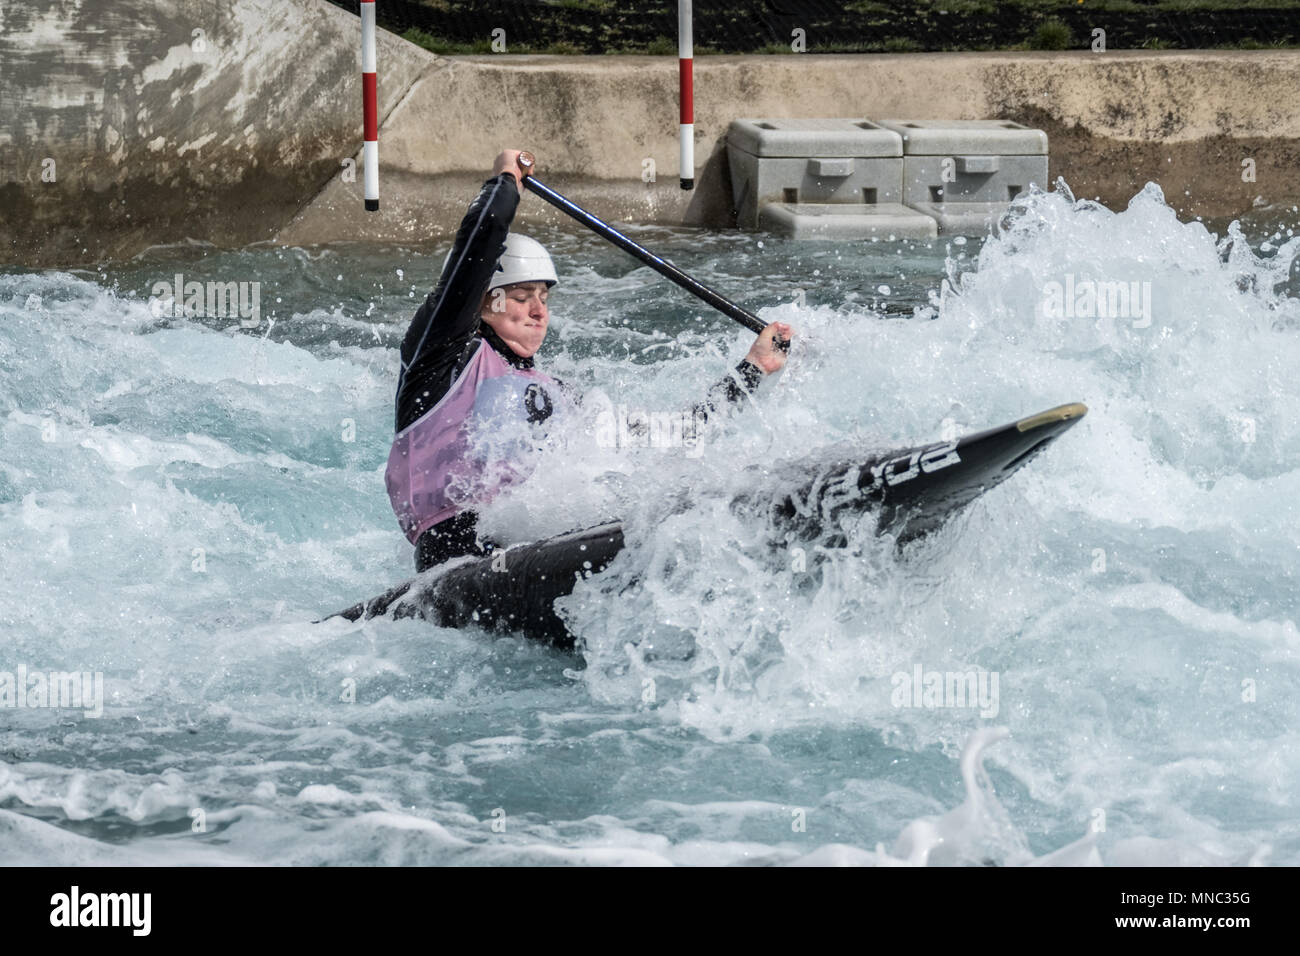 Day 1 of the British canoeing selection taking place at Lee Valley White Water Centre in Waltham Cross, UK. Stock Photo